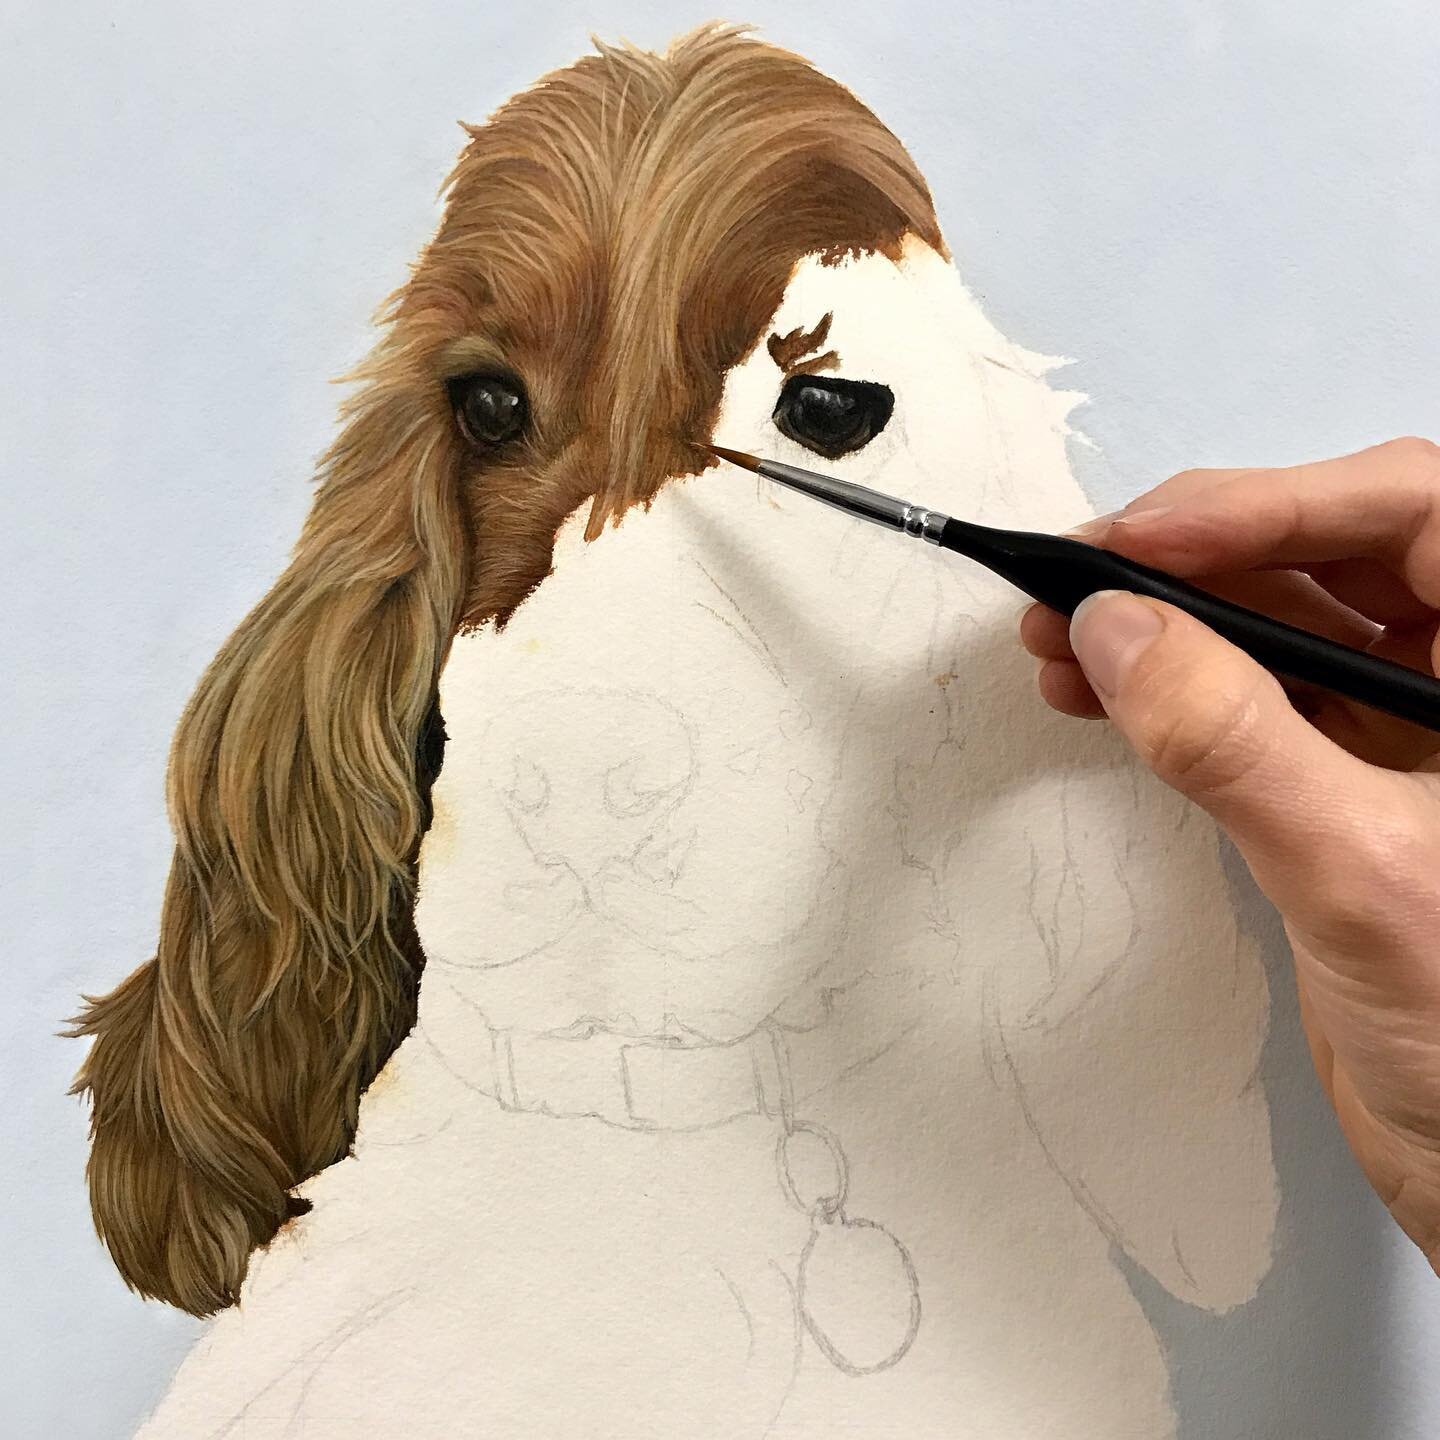 Hope everyone&rsquo;s having a great week so far☺️. 
Here&rsquo;s a little work in progress of my current commission - very happy with his progress so far! 🐶
Starting next week I am excited to say I can share all my secret commissions!🎉 Can&rsquo;t